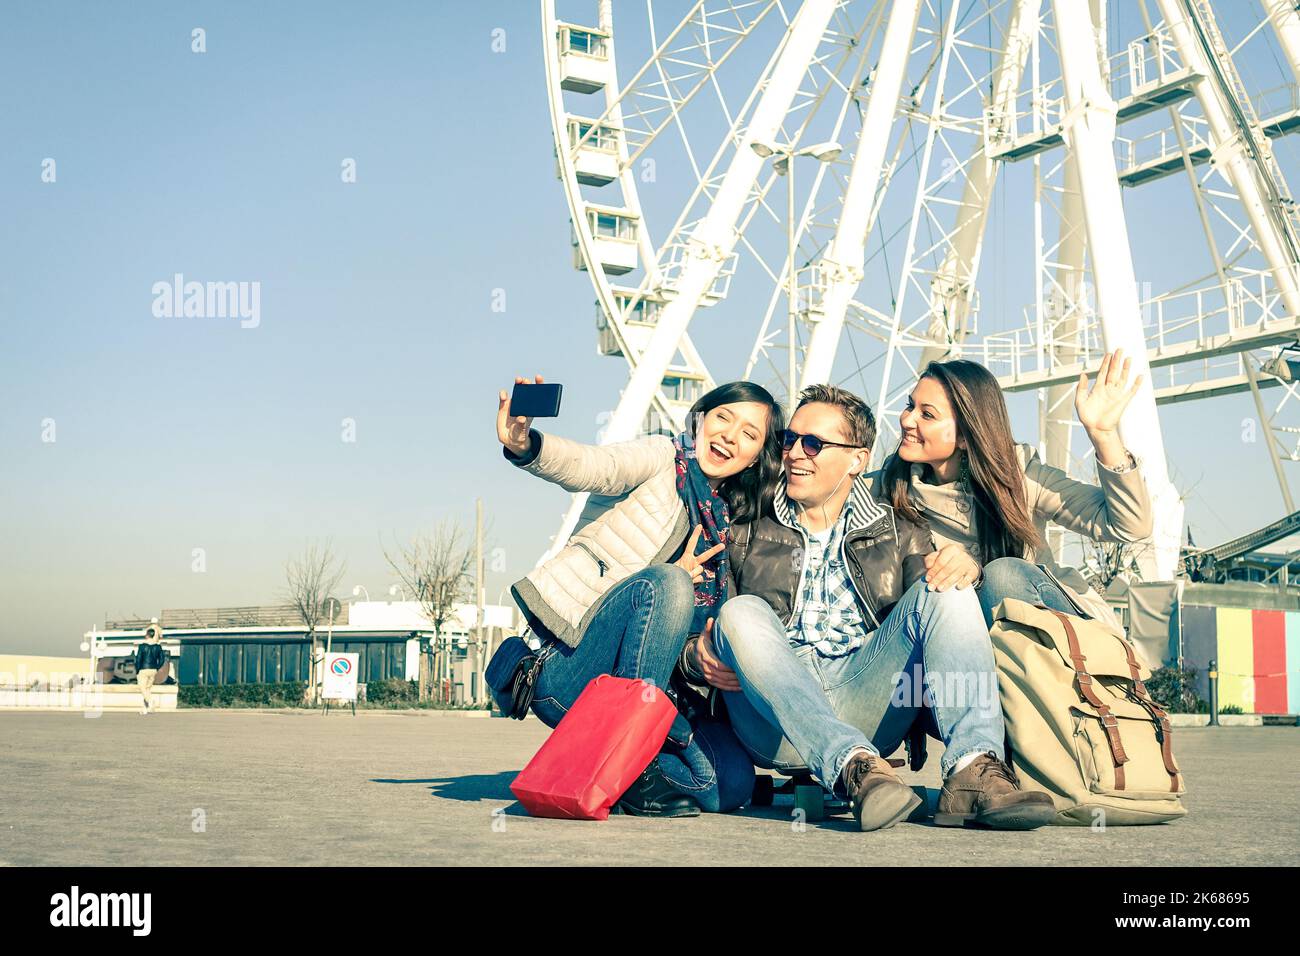 Young hipster people taking a selfie at luna park with ferris wheel - Concept of friendship and fun with new trends and technology - Best friends catc Stock Photo